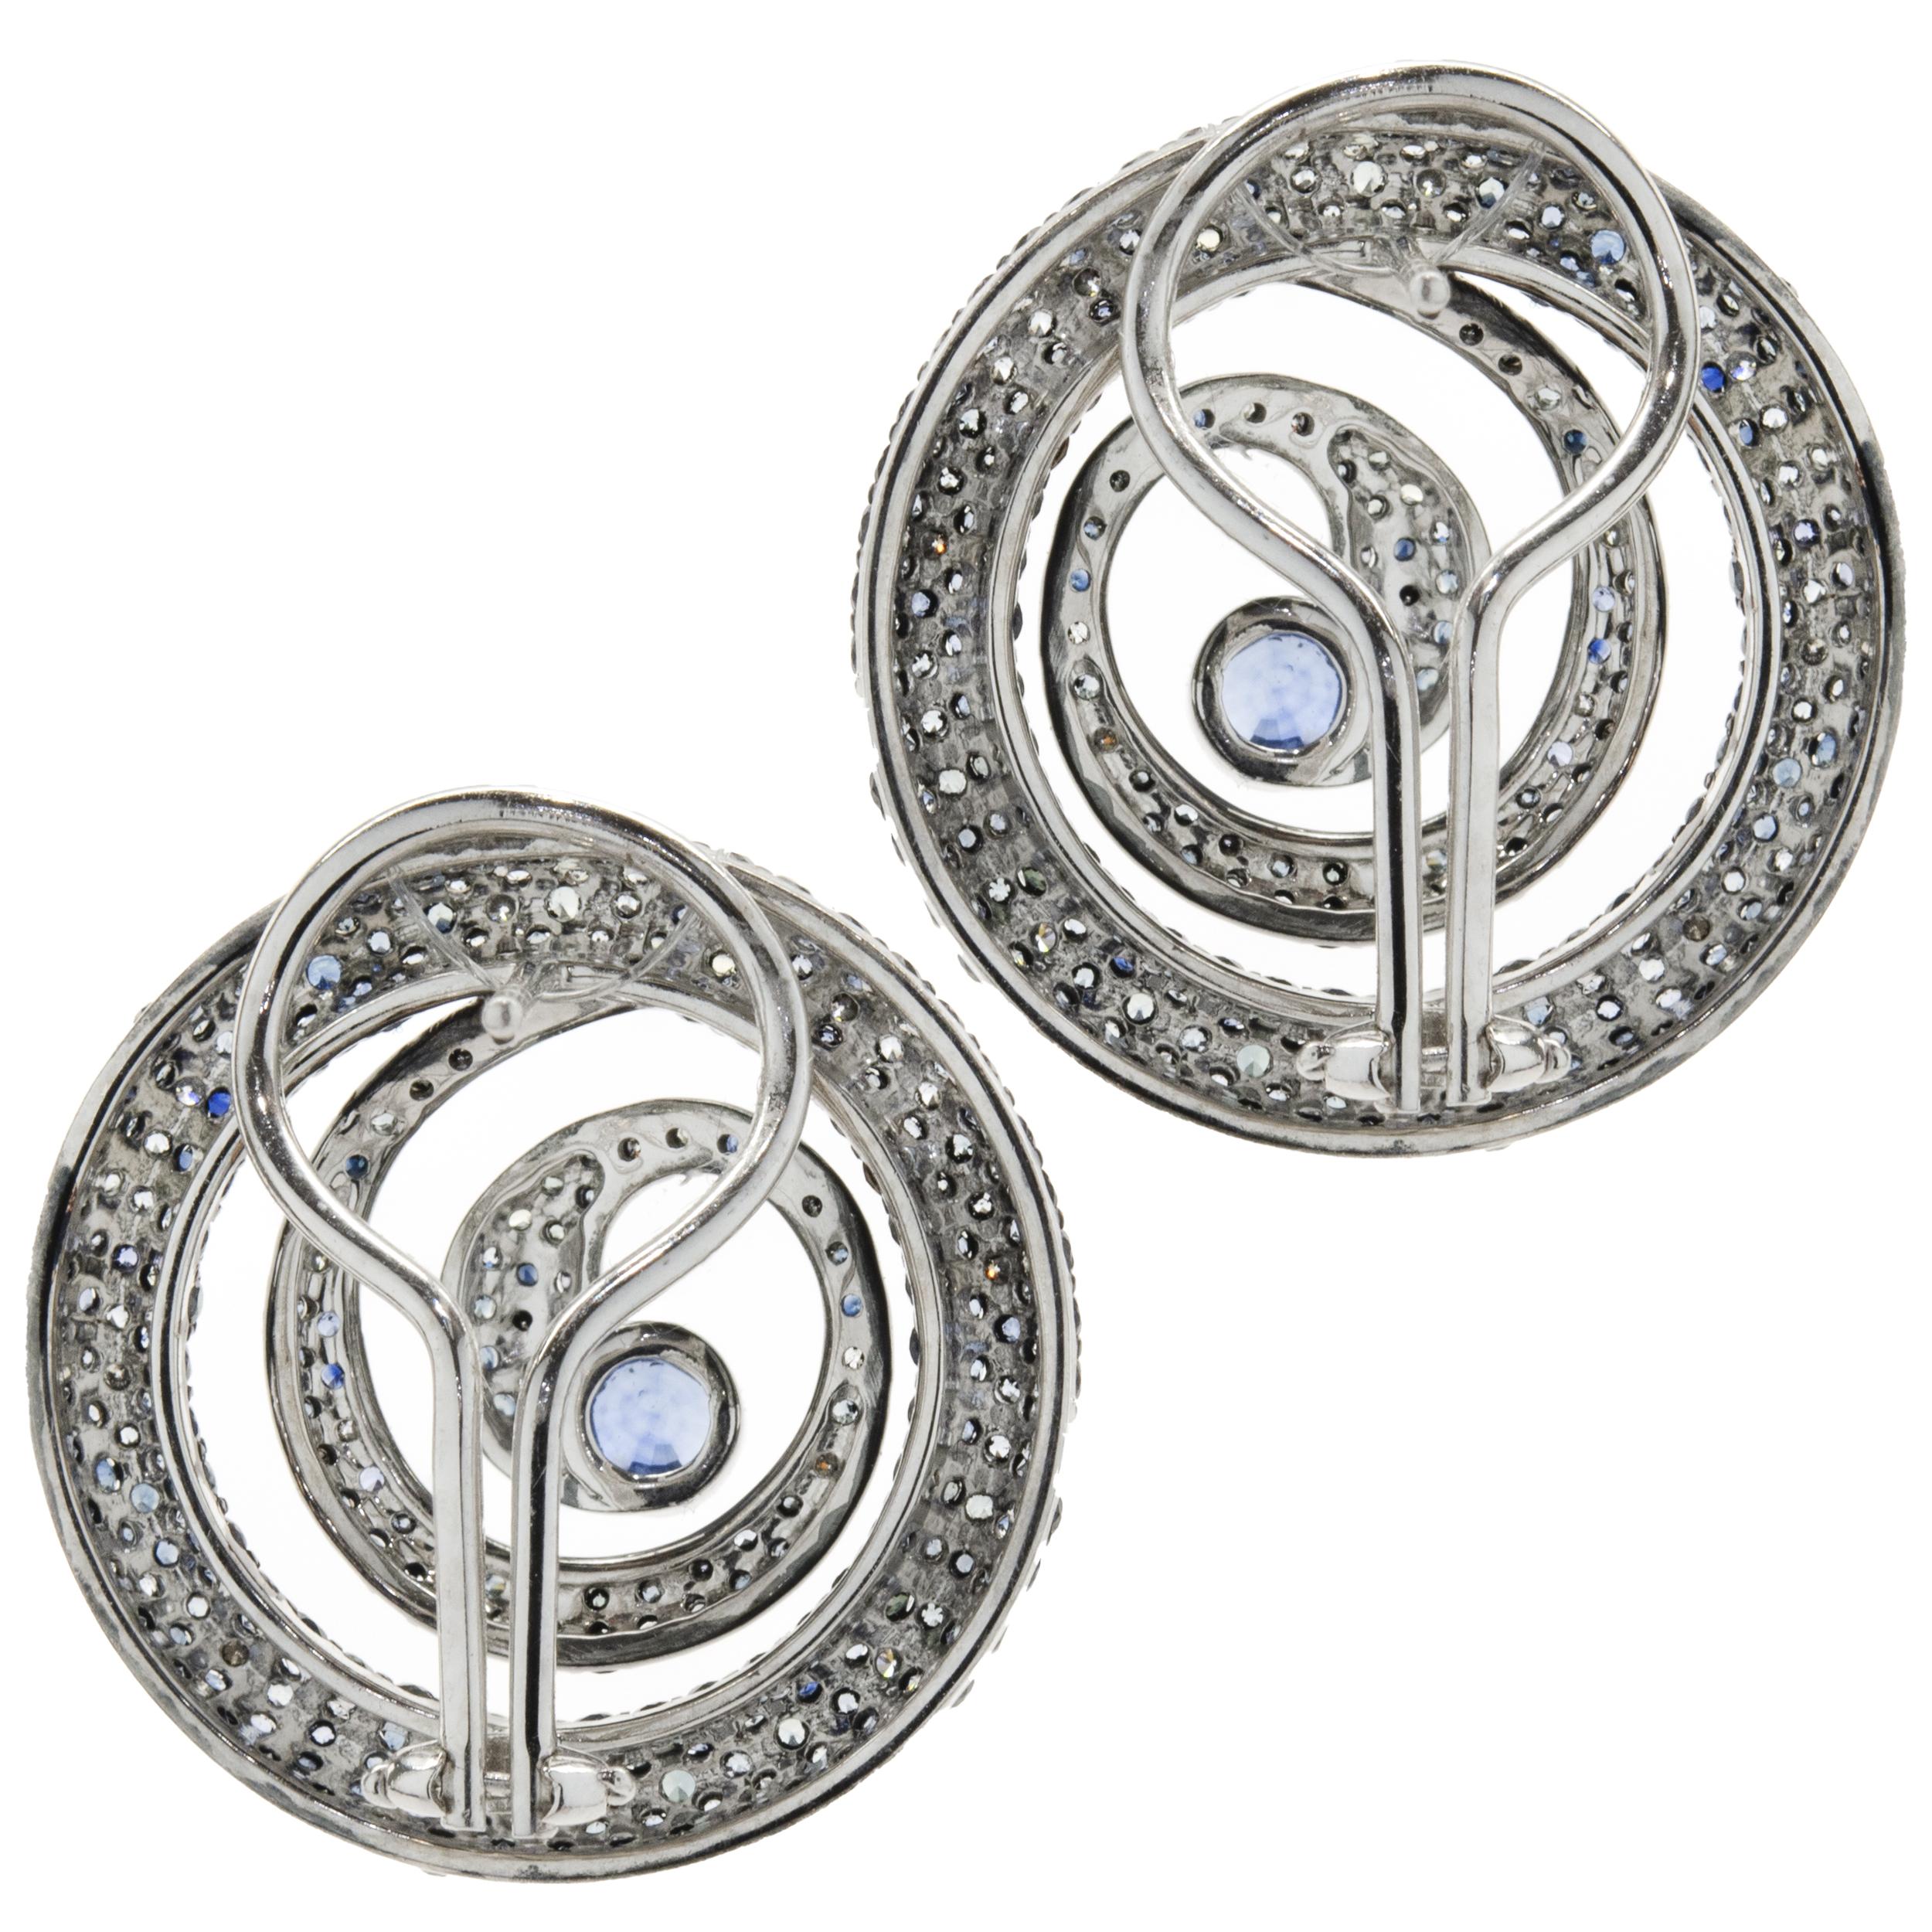 Designer: custom
Material: 18K white gold
Diamond: 22 round brilliant cut = 0.25cttw
Color: G
Clarity: SI2
Dimensions: earrings measure 24.75mm
Fastenings: posts with omega backs
Weight: 14.15 grams